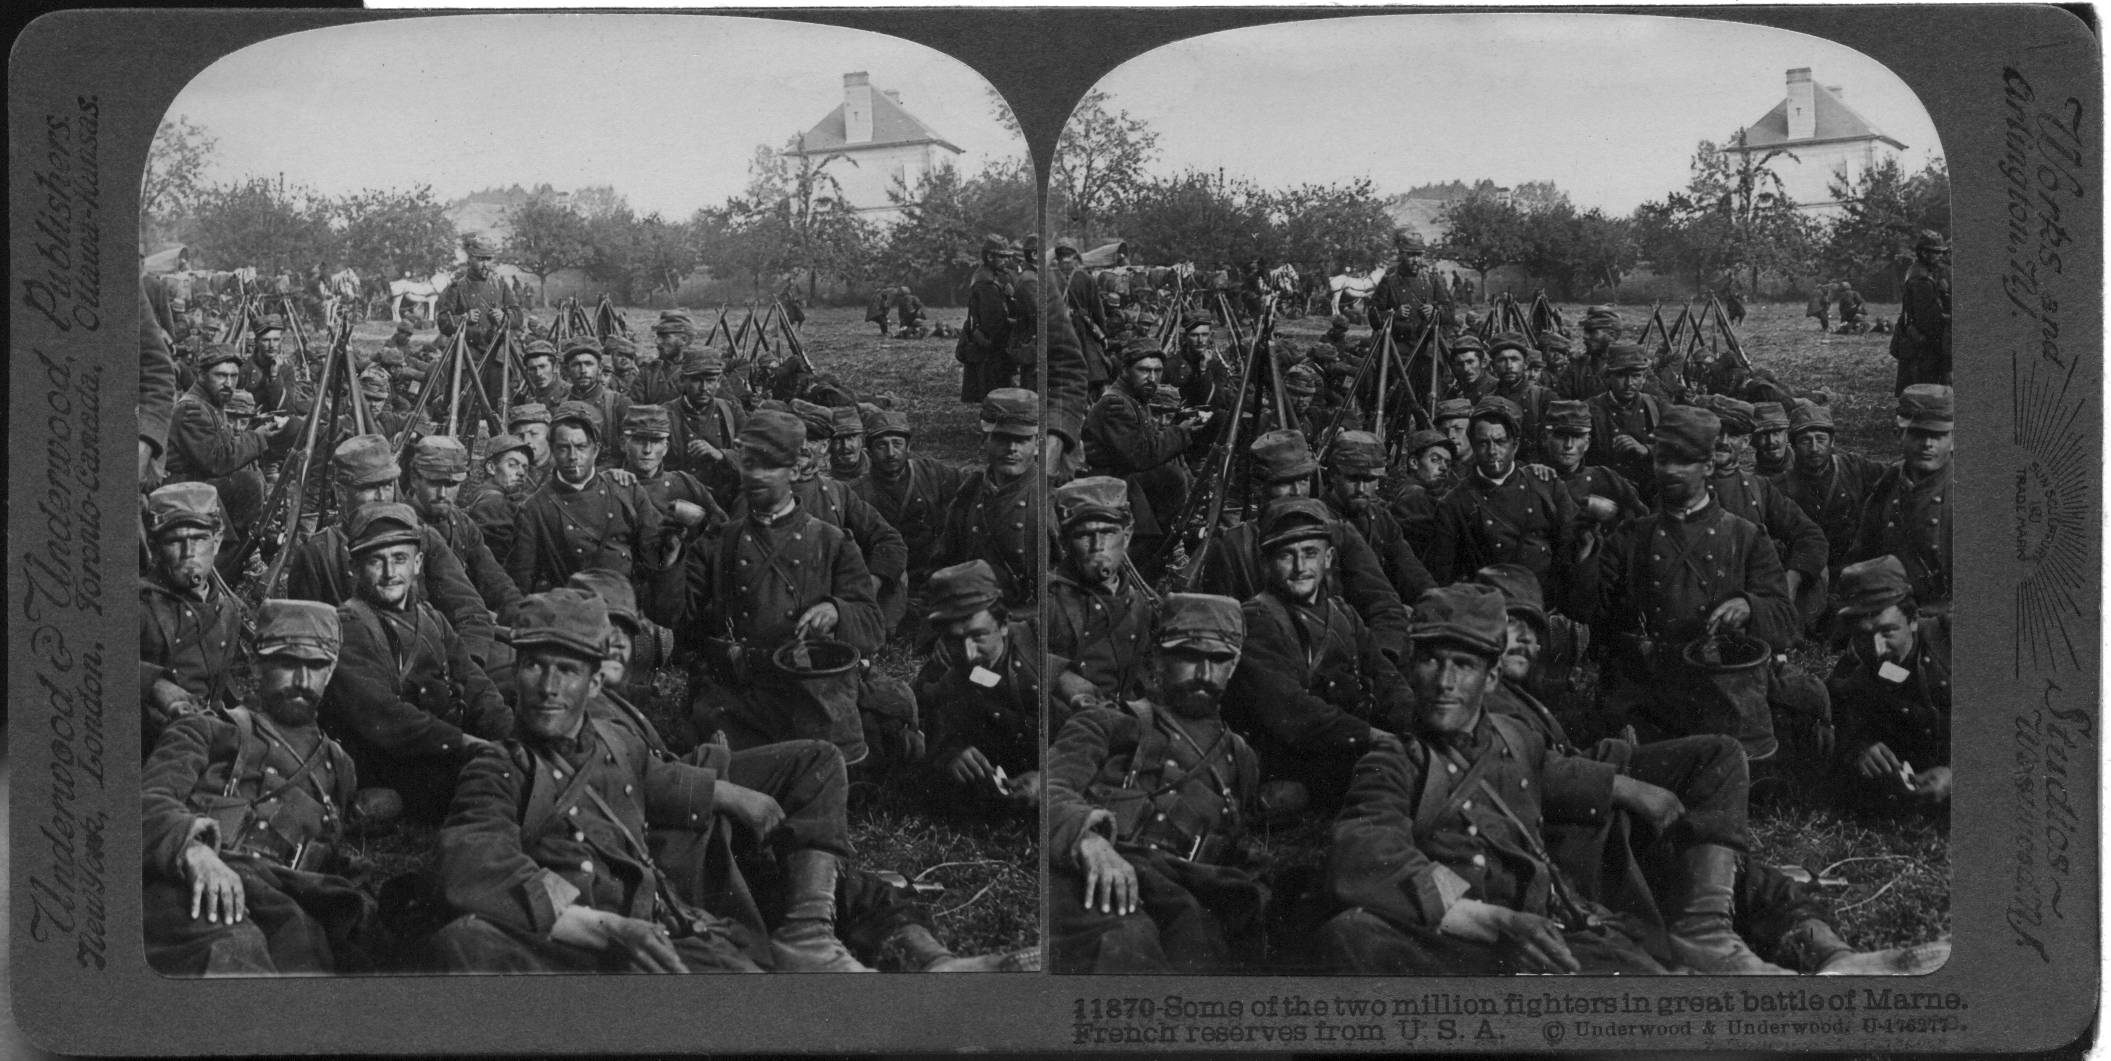 Some of the two million fighters in great battle of Marne. French reserves from U.S.A.